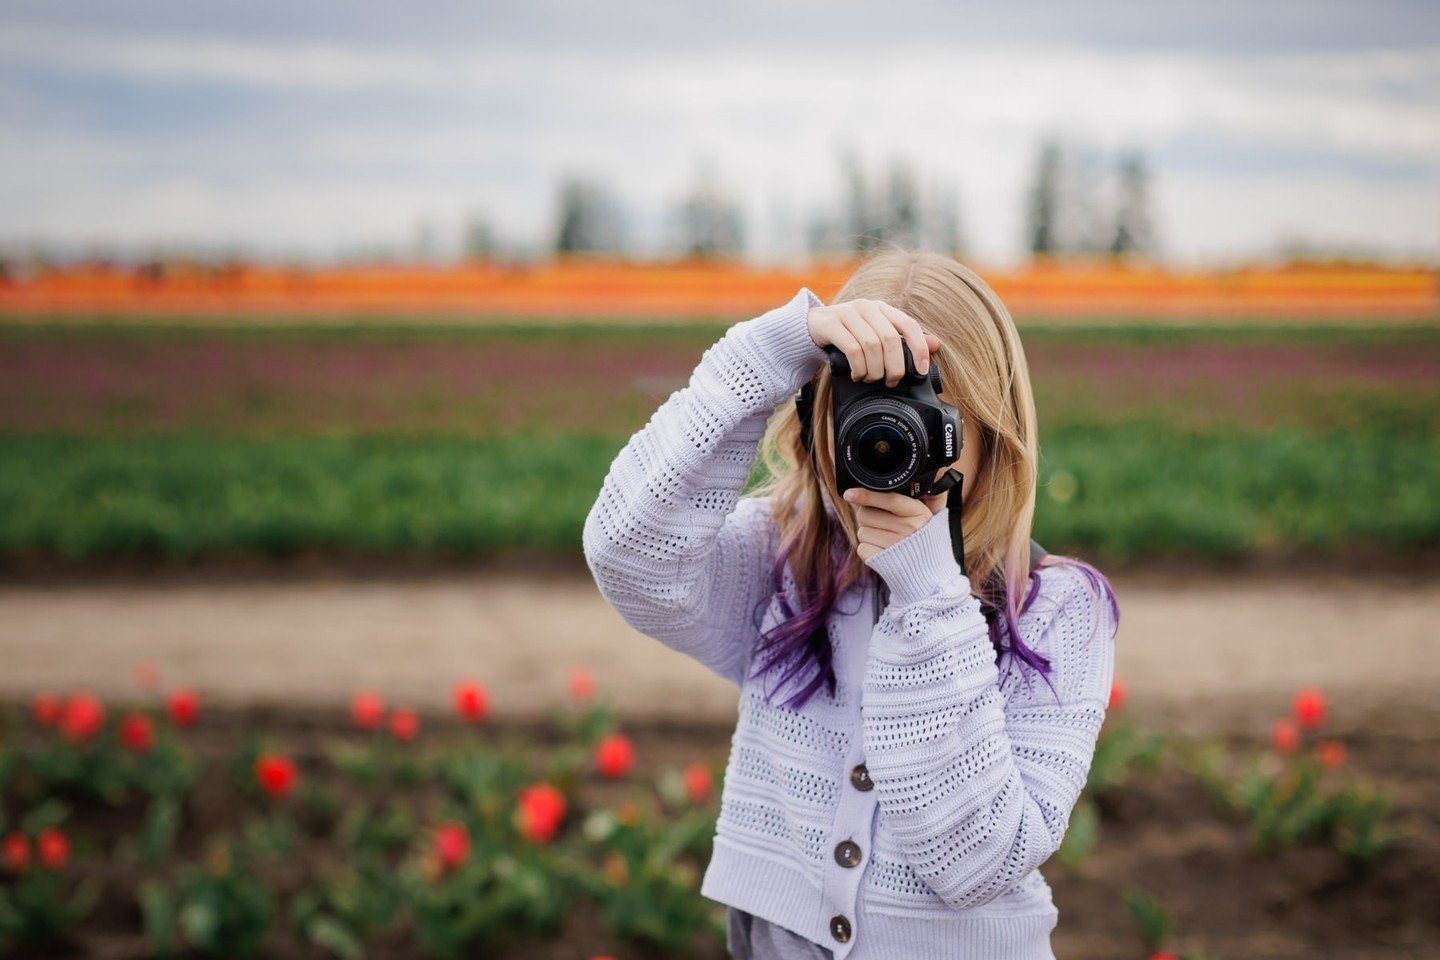 Is your kid creative? Smart? Curious? They might have a future career path in Photography! ⁠
⁠
Let them explore their curiosity at my Photo Camp. For one-week, your 9-15 year old can be immersed in the world of photography all while learning valuable